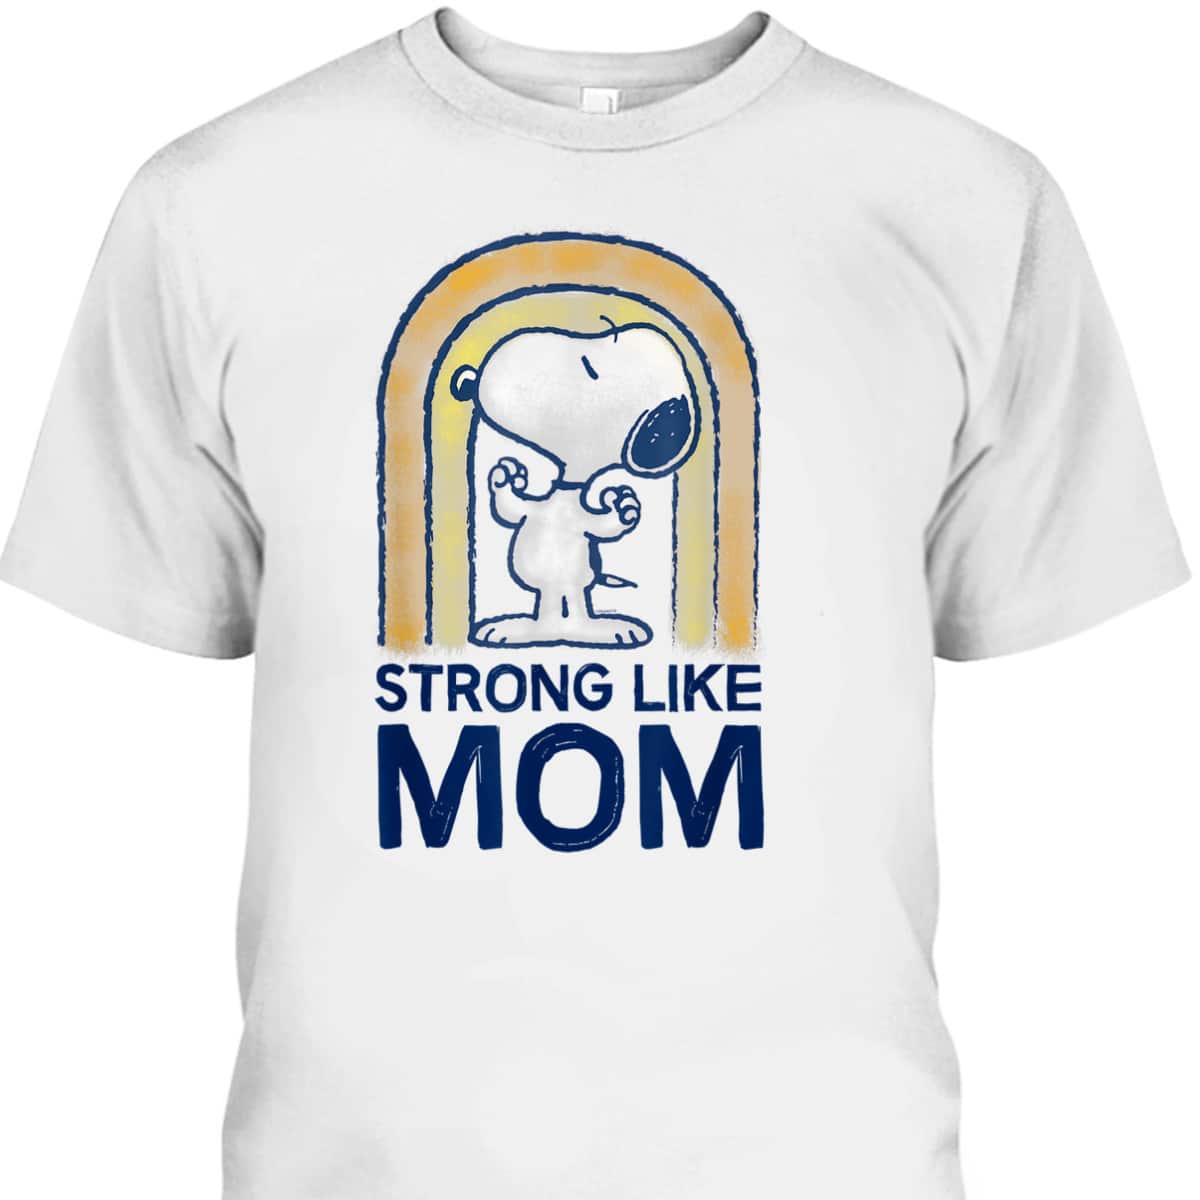 Peanuts Snoopy Mother's Day T-Shirt Strong Like Mom